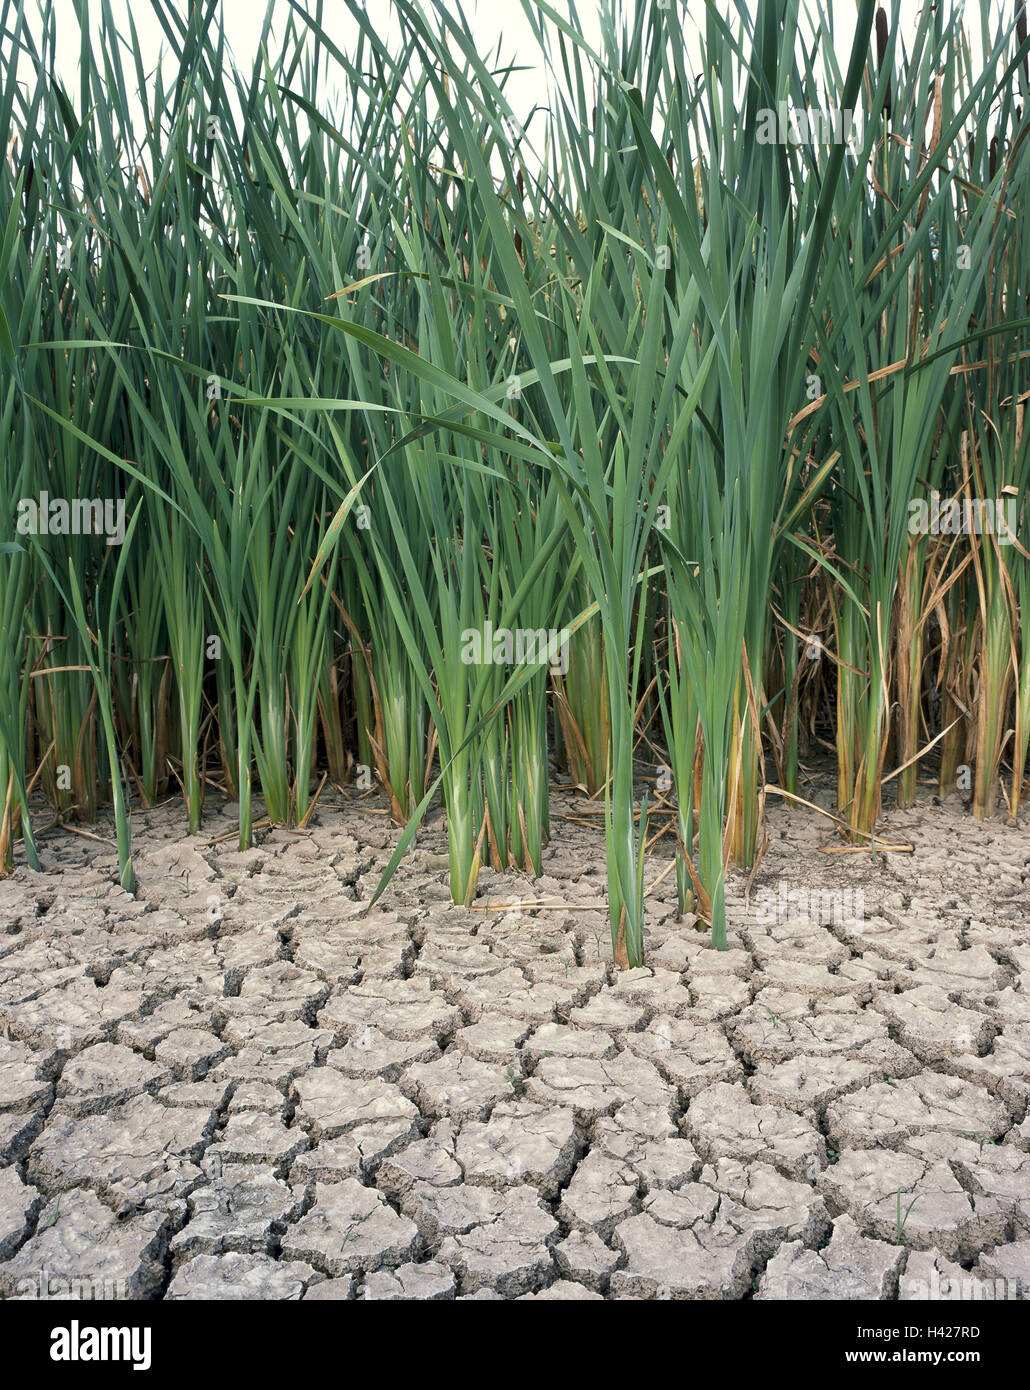 Waters, parched, shore, reed, dryness, dryness, water shortage ground, mud, cracked, fissures, heat fissures, dry fissures, parched, dried up, Verlandung, plants, plants, vegetation, narrow-leafy cat's tail, Typha angustifolia, conception, dry weather, he Stock Photo